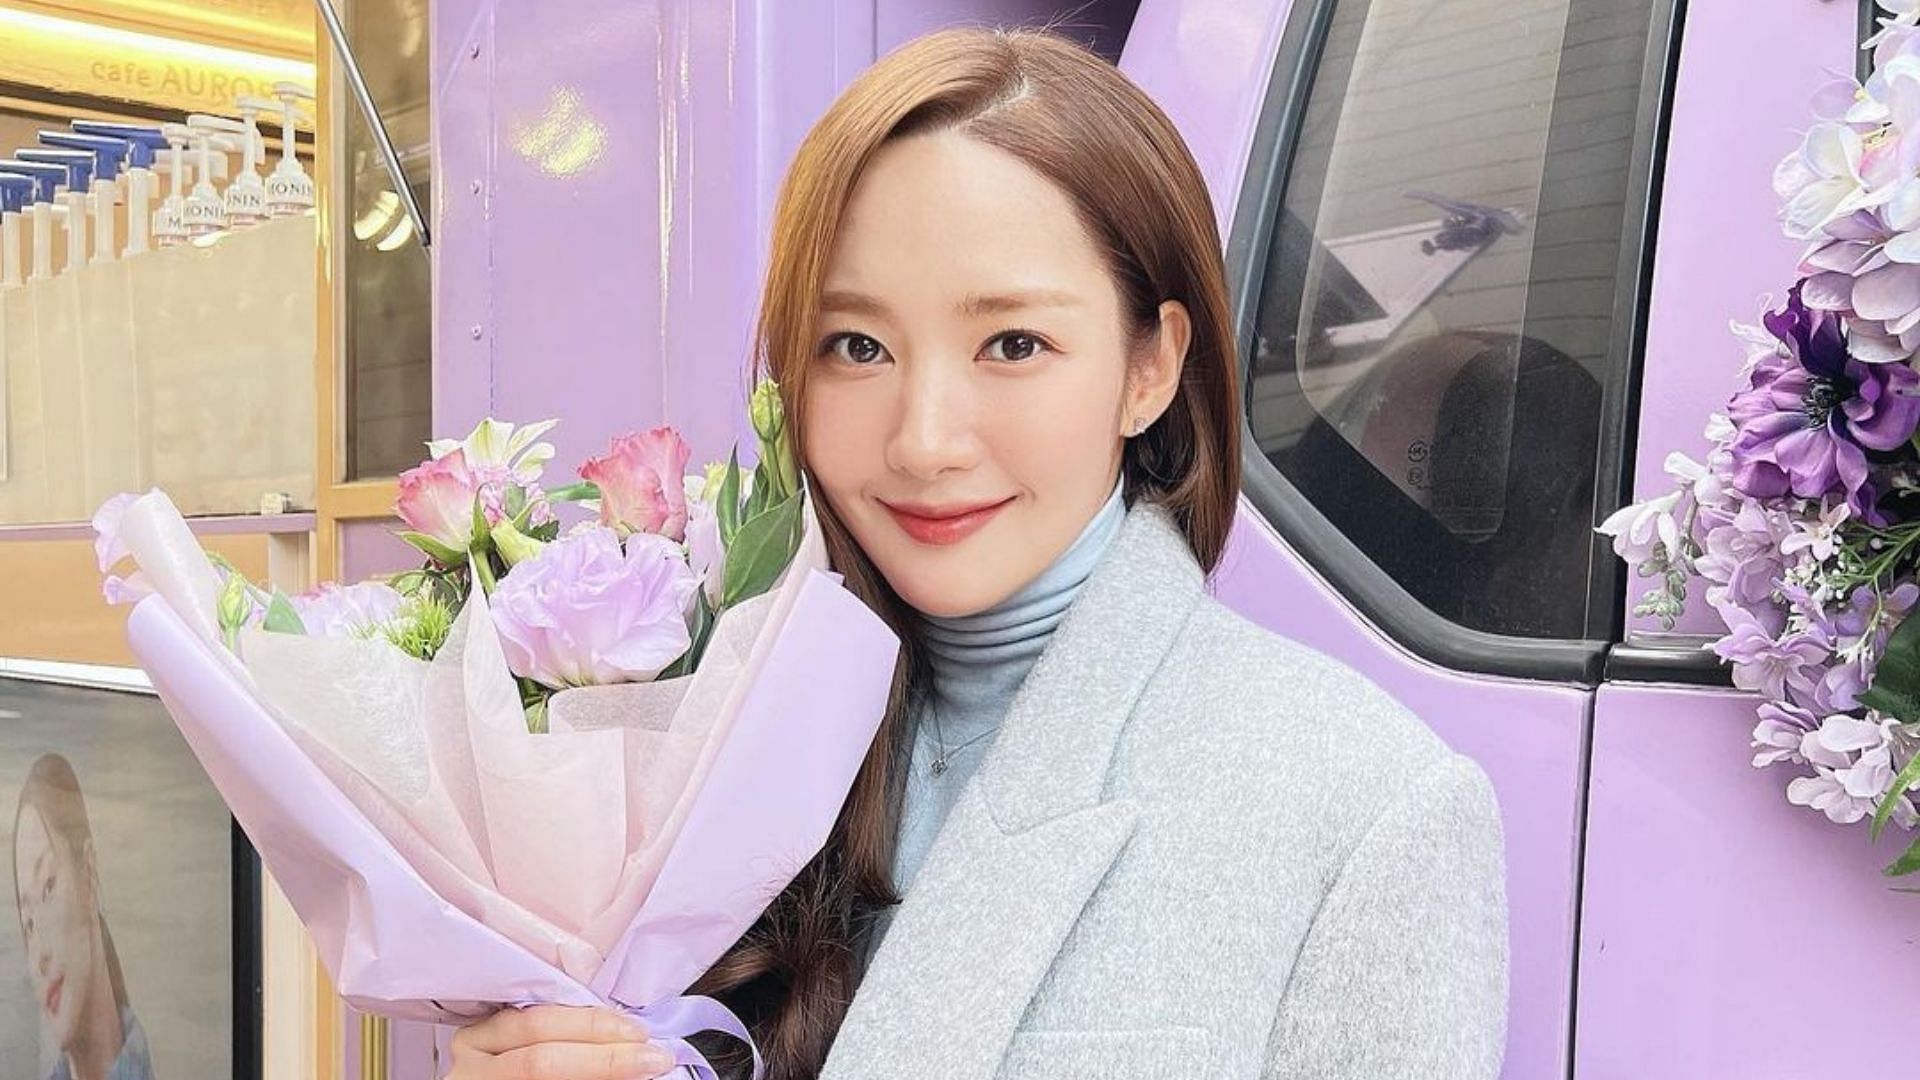 A still of actor Park Min Young, who recently parted ways with her agency Namoo Actors (Image via rachel_mypark/Instagram)